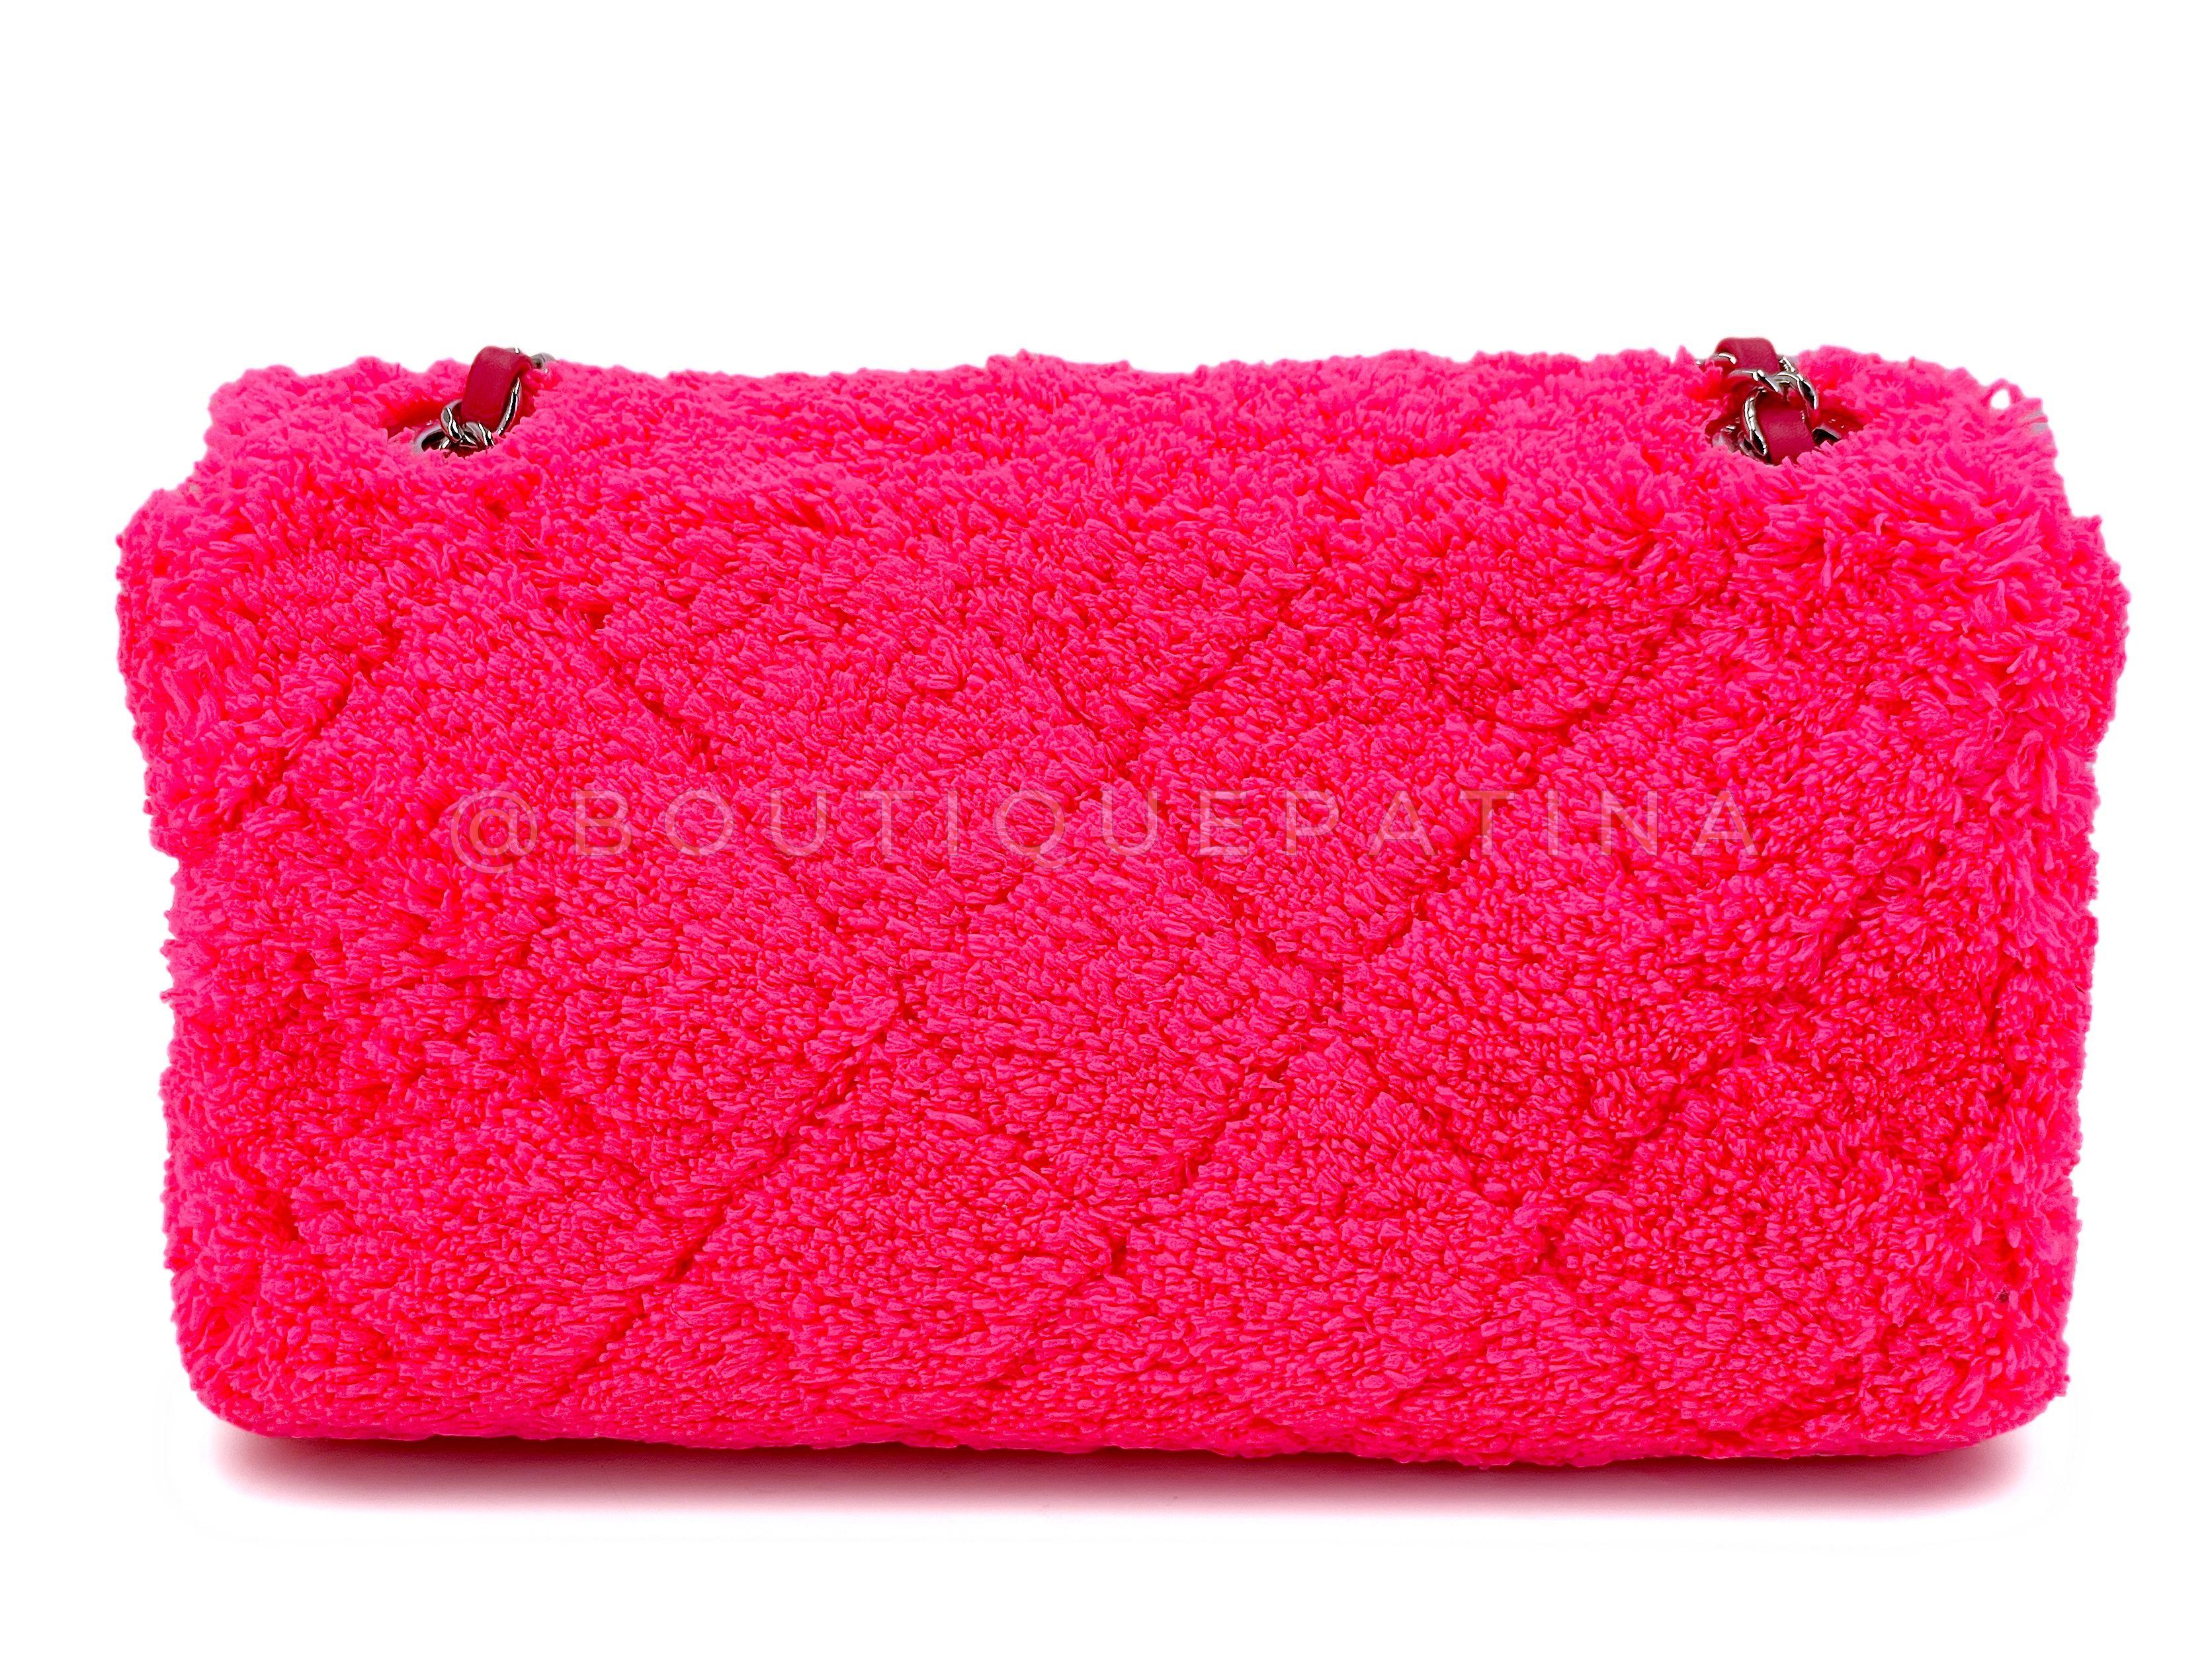 Chanel Neon Pink Terry Fur Flap Bag 67683 For Sale 1